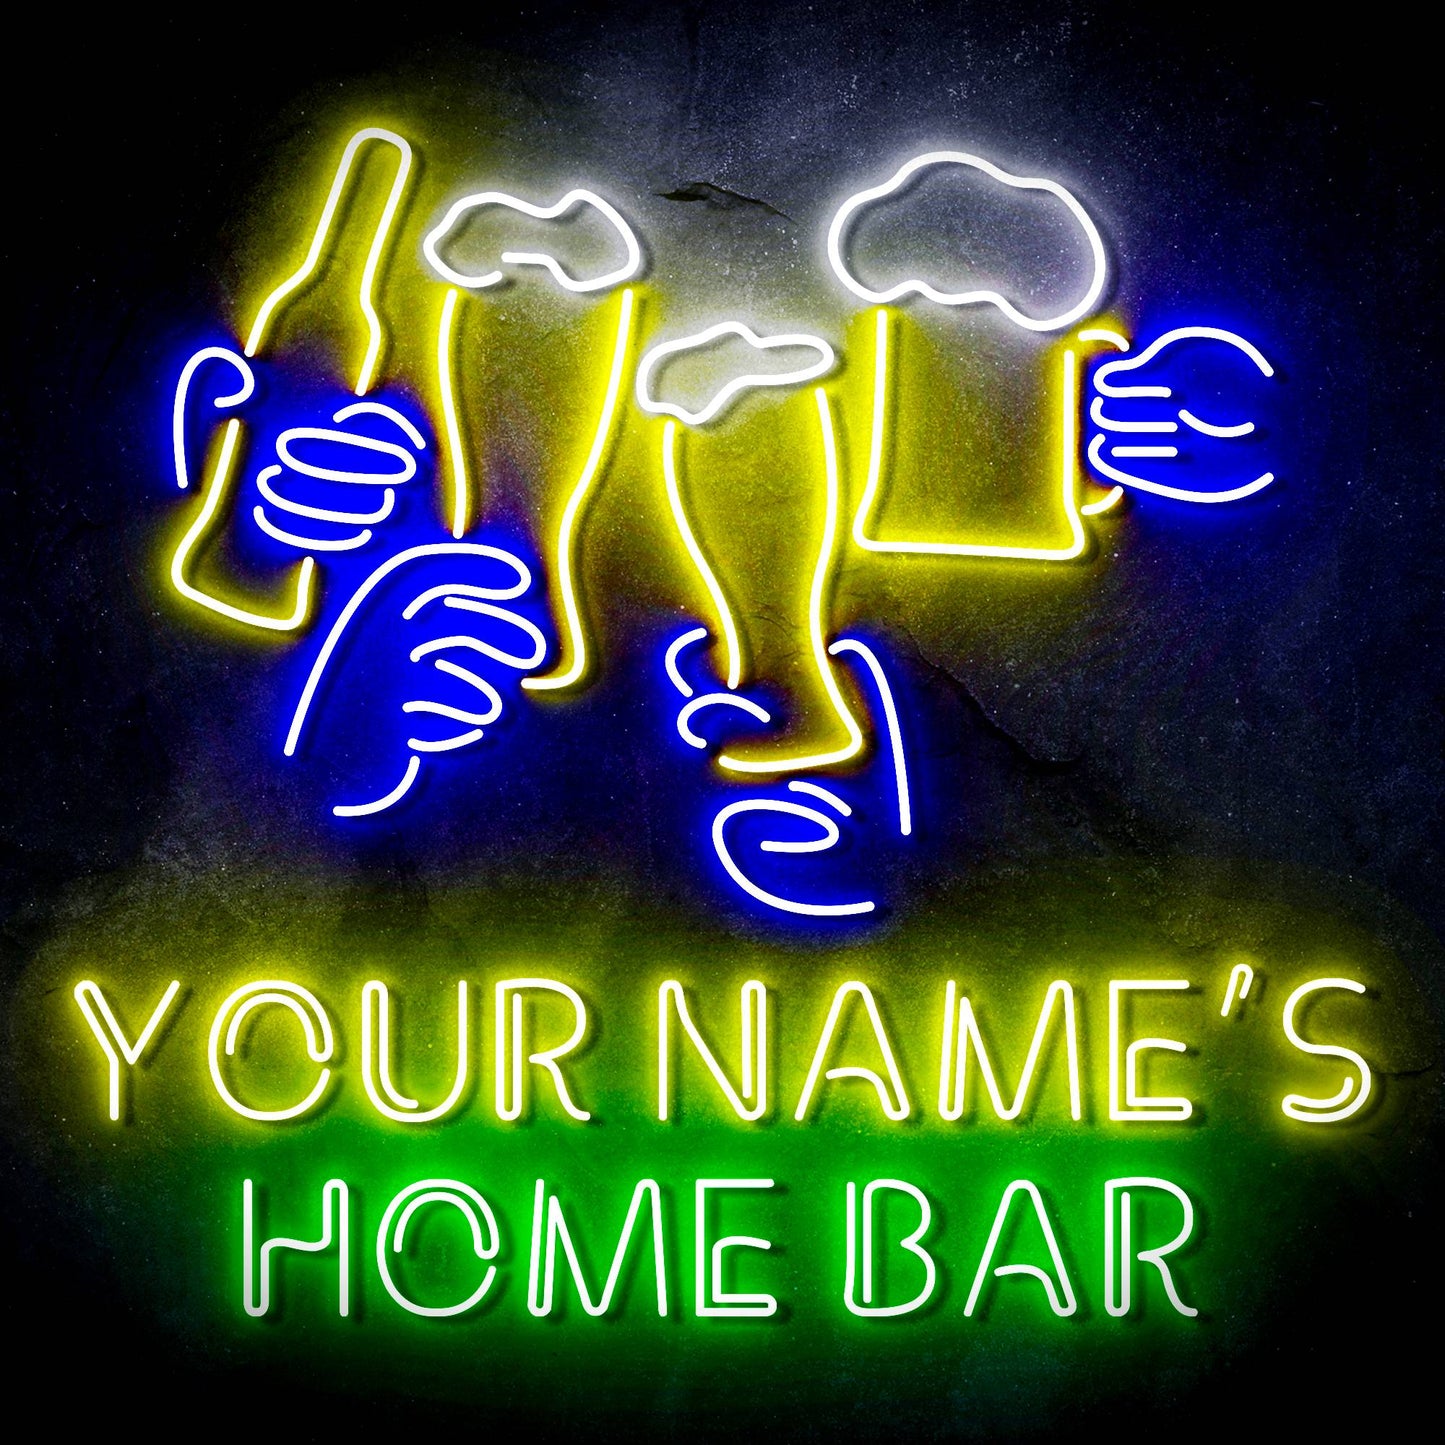 Custom Ultra-Bright Beer Party Neighborhood Pub Bar LED Neon Sign - Way Up Gifts